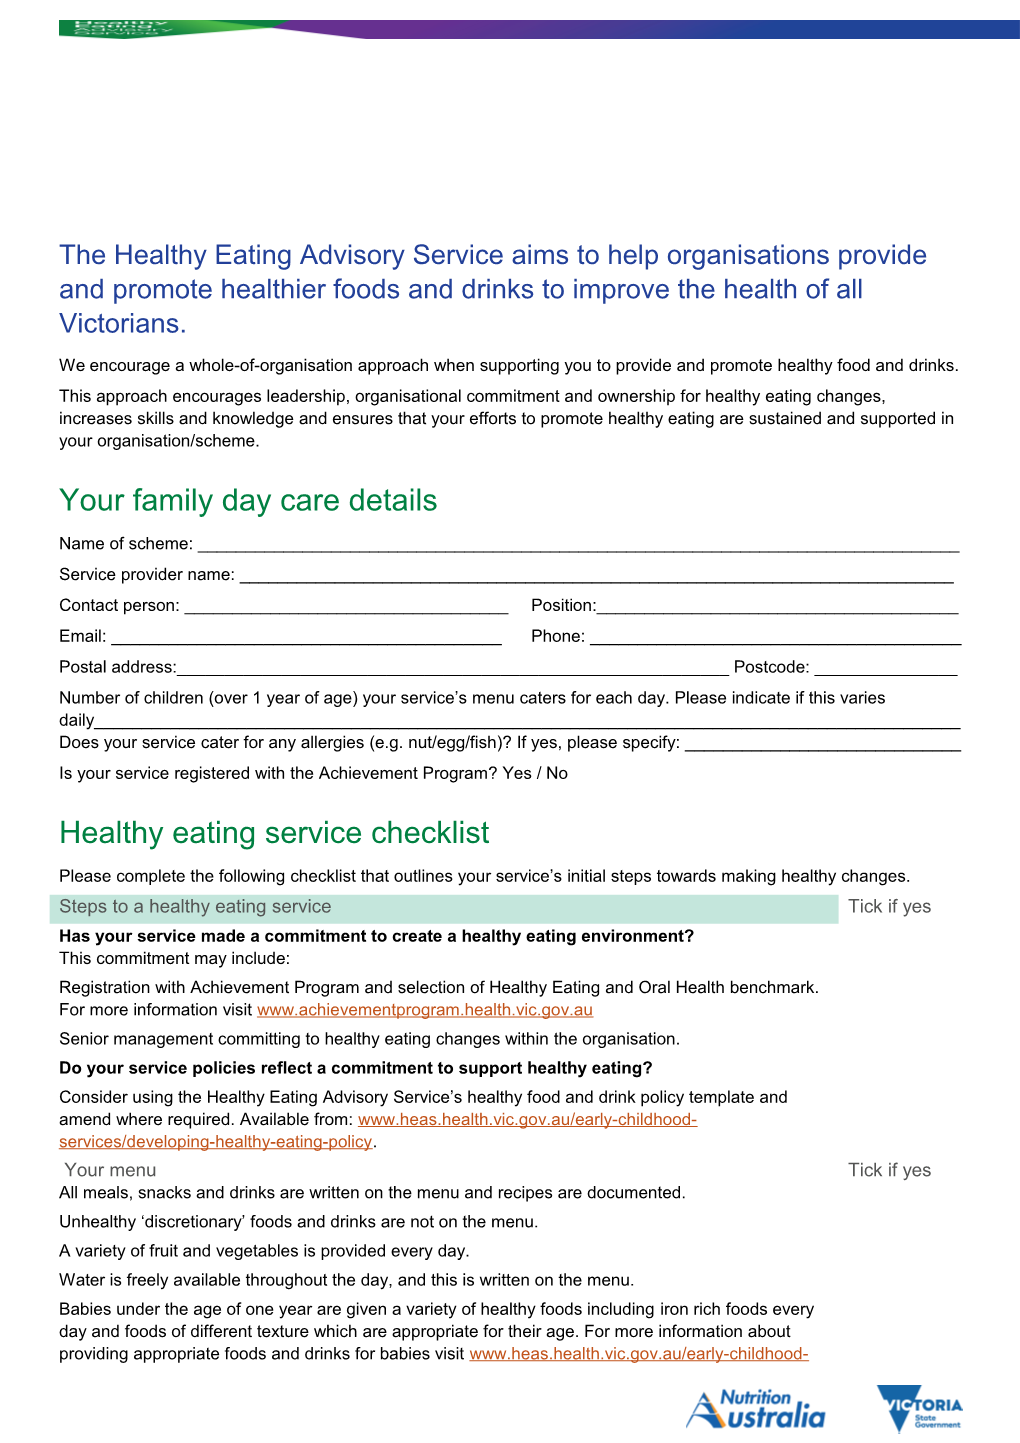 The Healthy Eating Advisory Service Aims to Help Organisations Provide and Promote Healthier